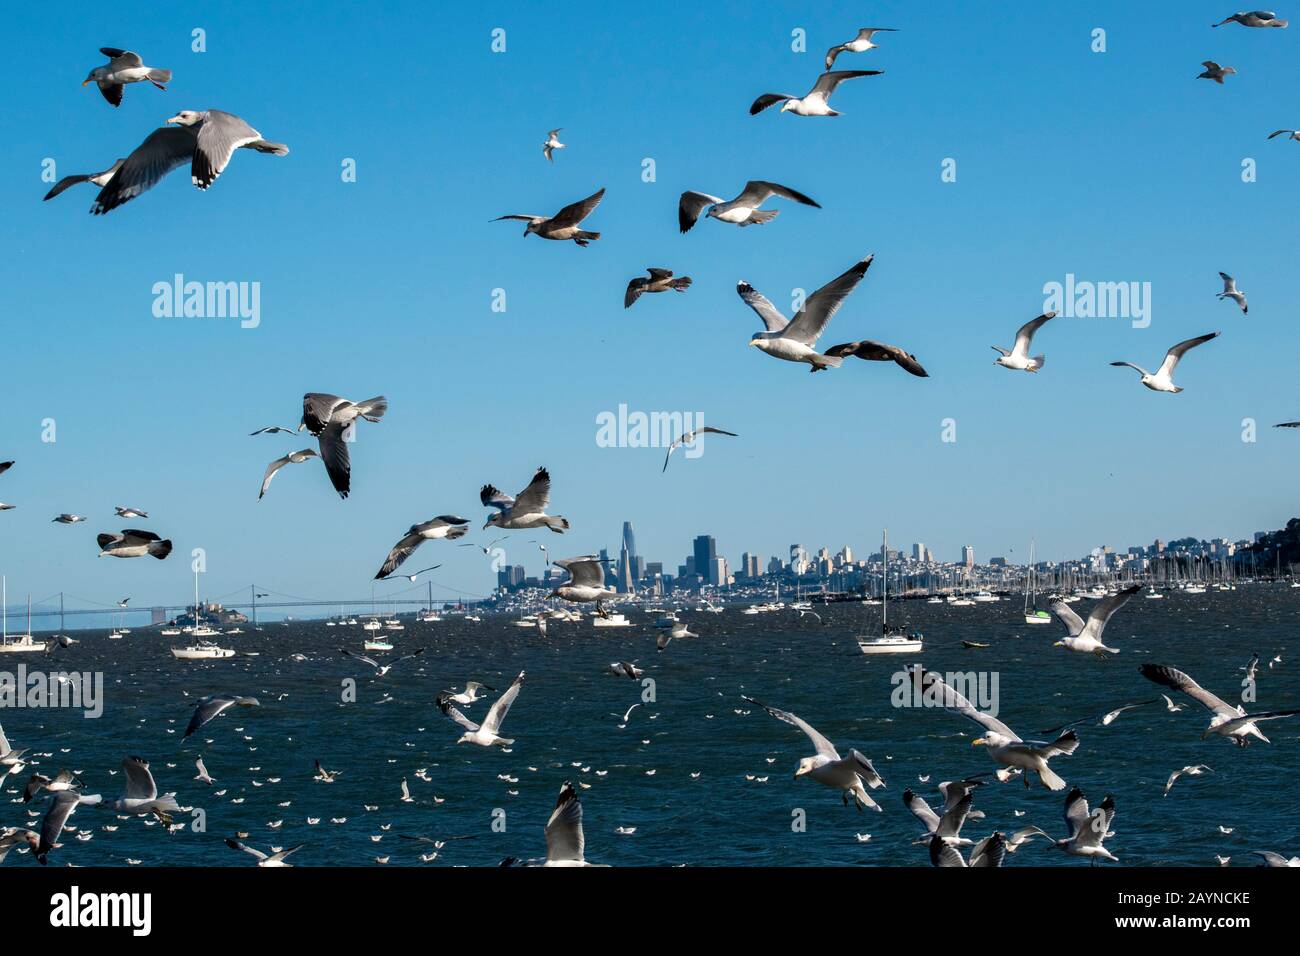 A flock of seagulls goes into a feeding frenzy in Strawberry, CA, with San Francisco in the background. Stock Photo